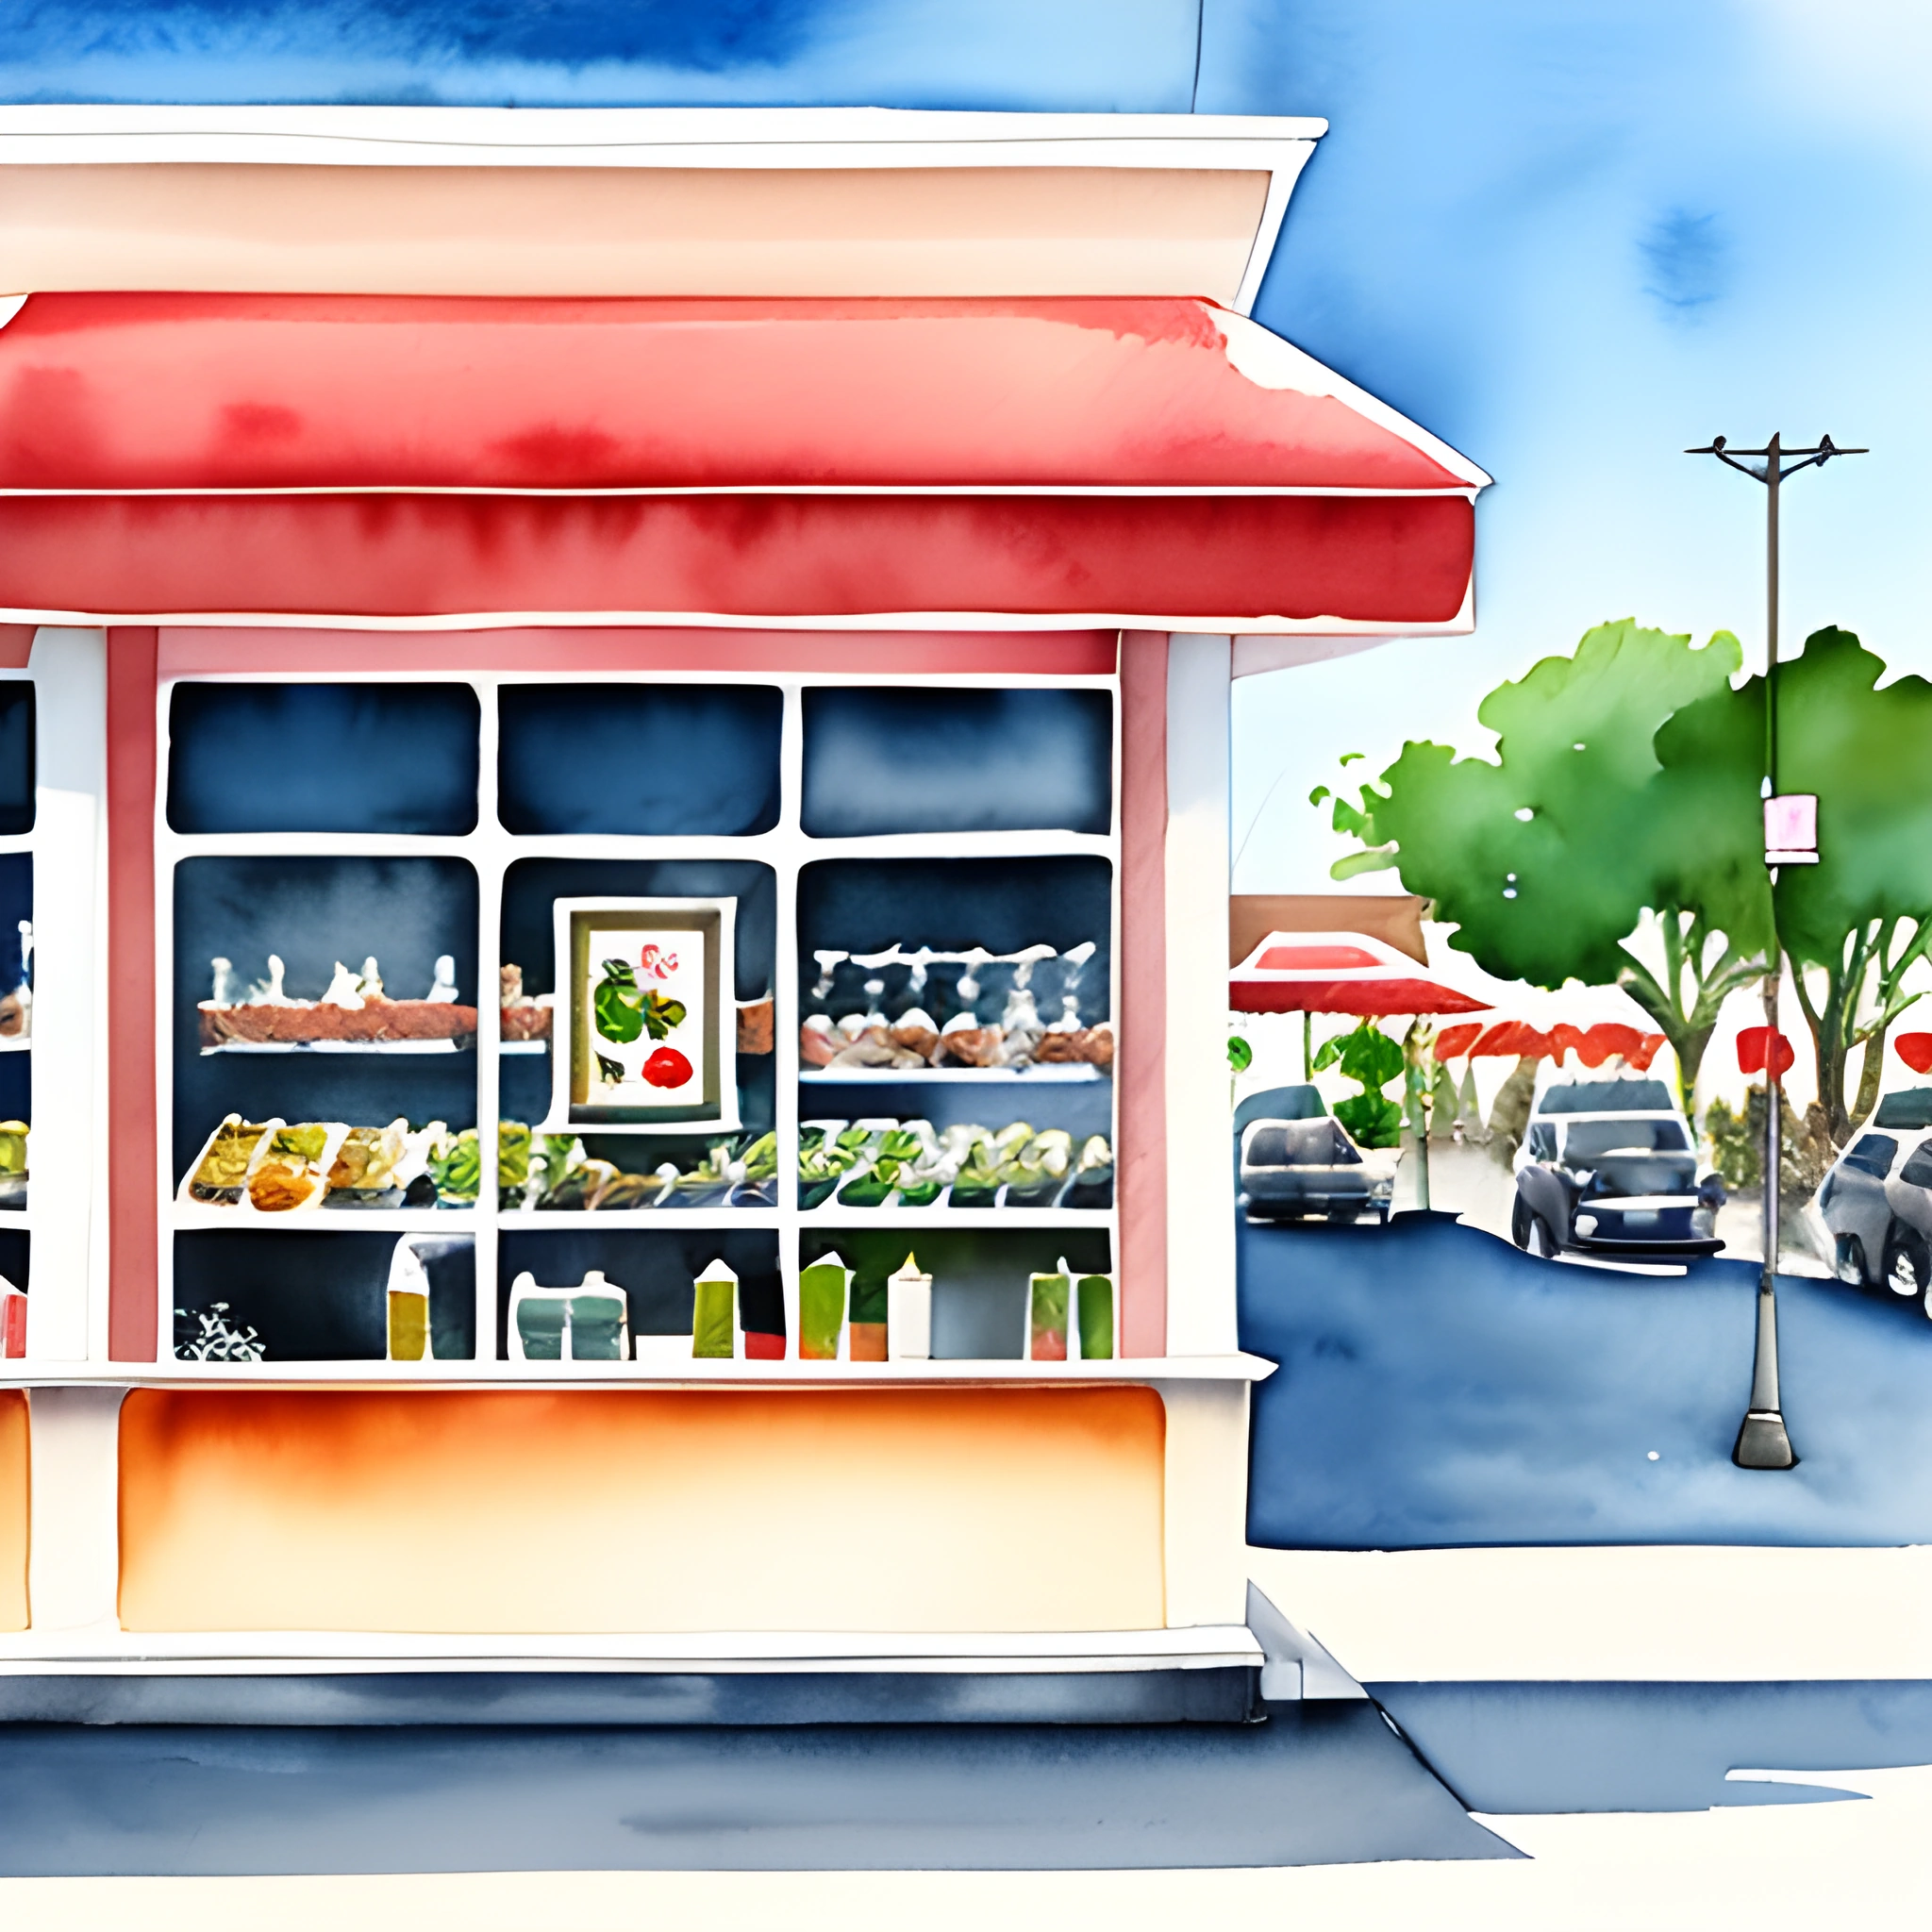 painting of a store front with a red awning and a red awning